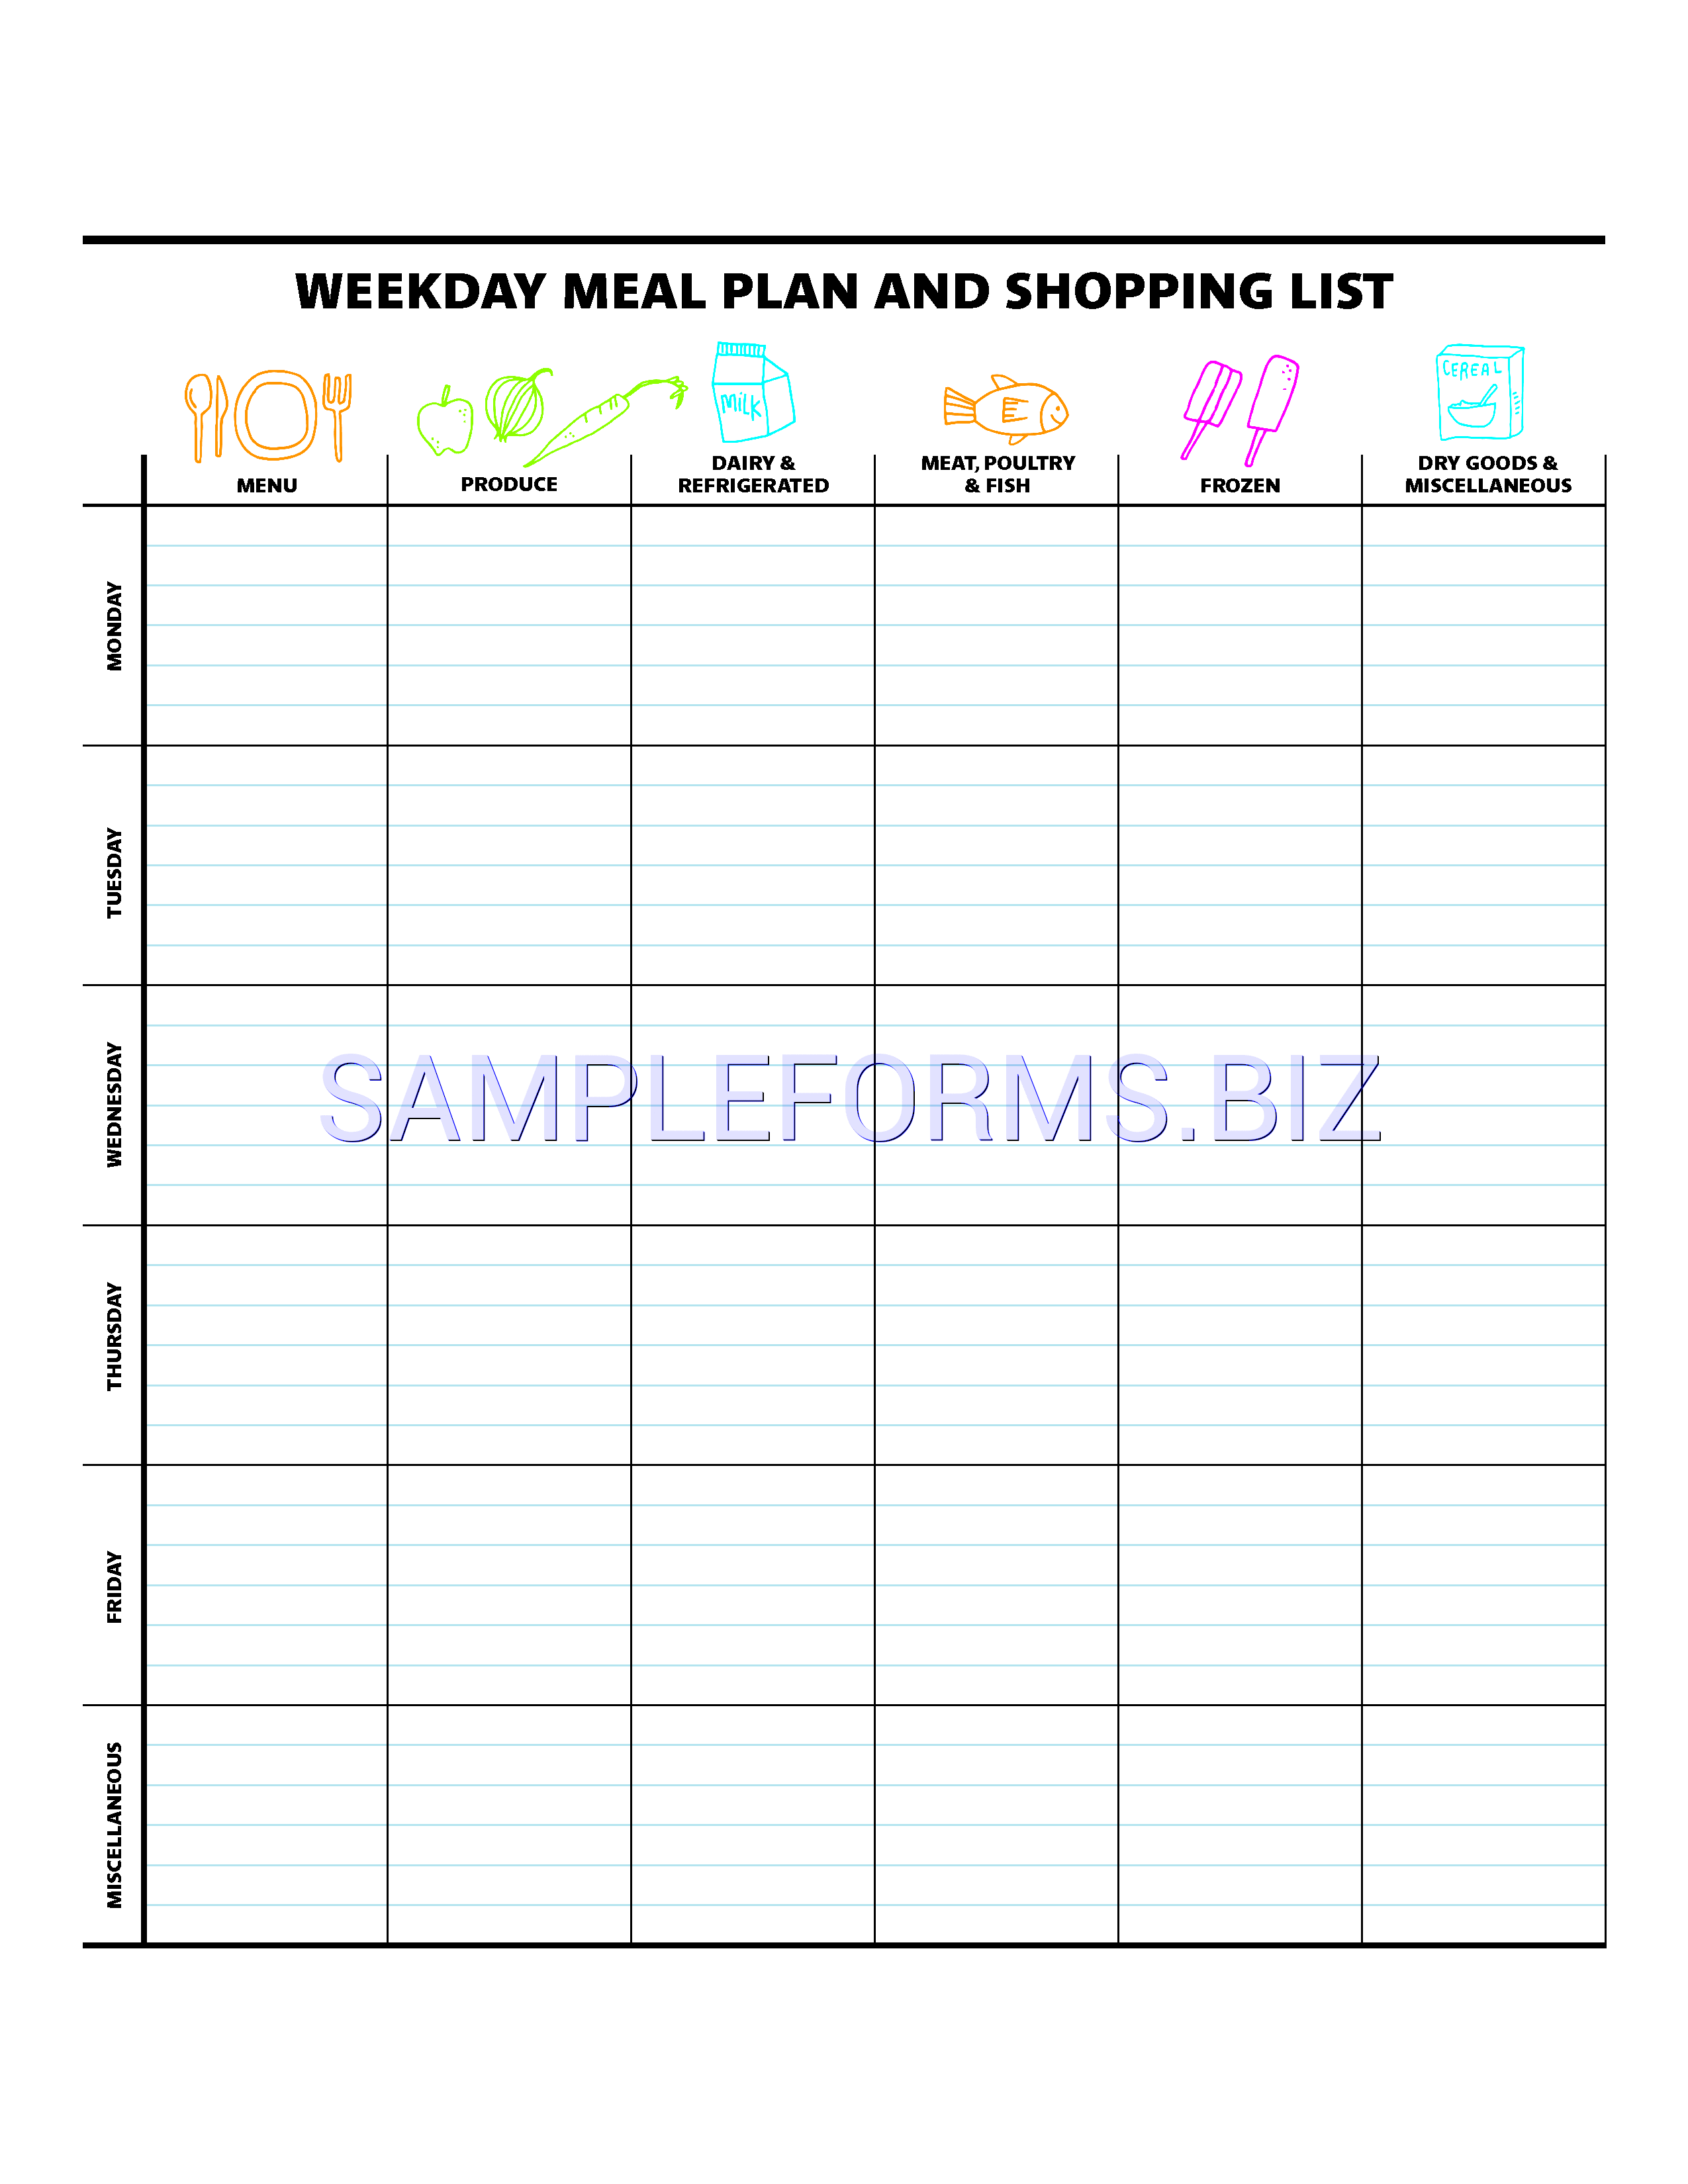 Preview free downloadable Weekday Meal Plan And Shopping List in PDF (page 1)